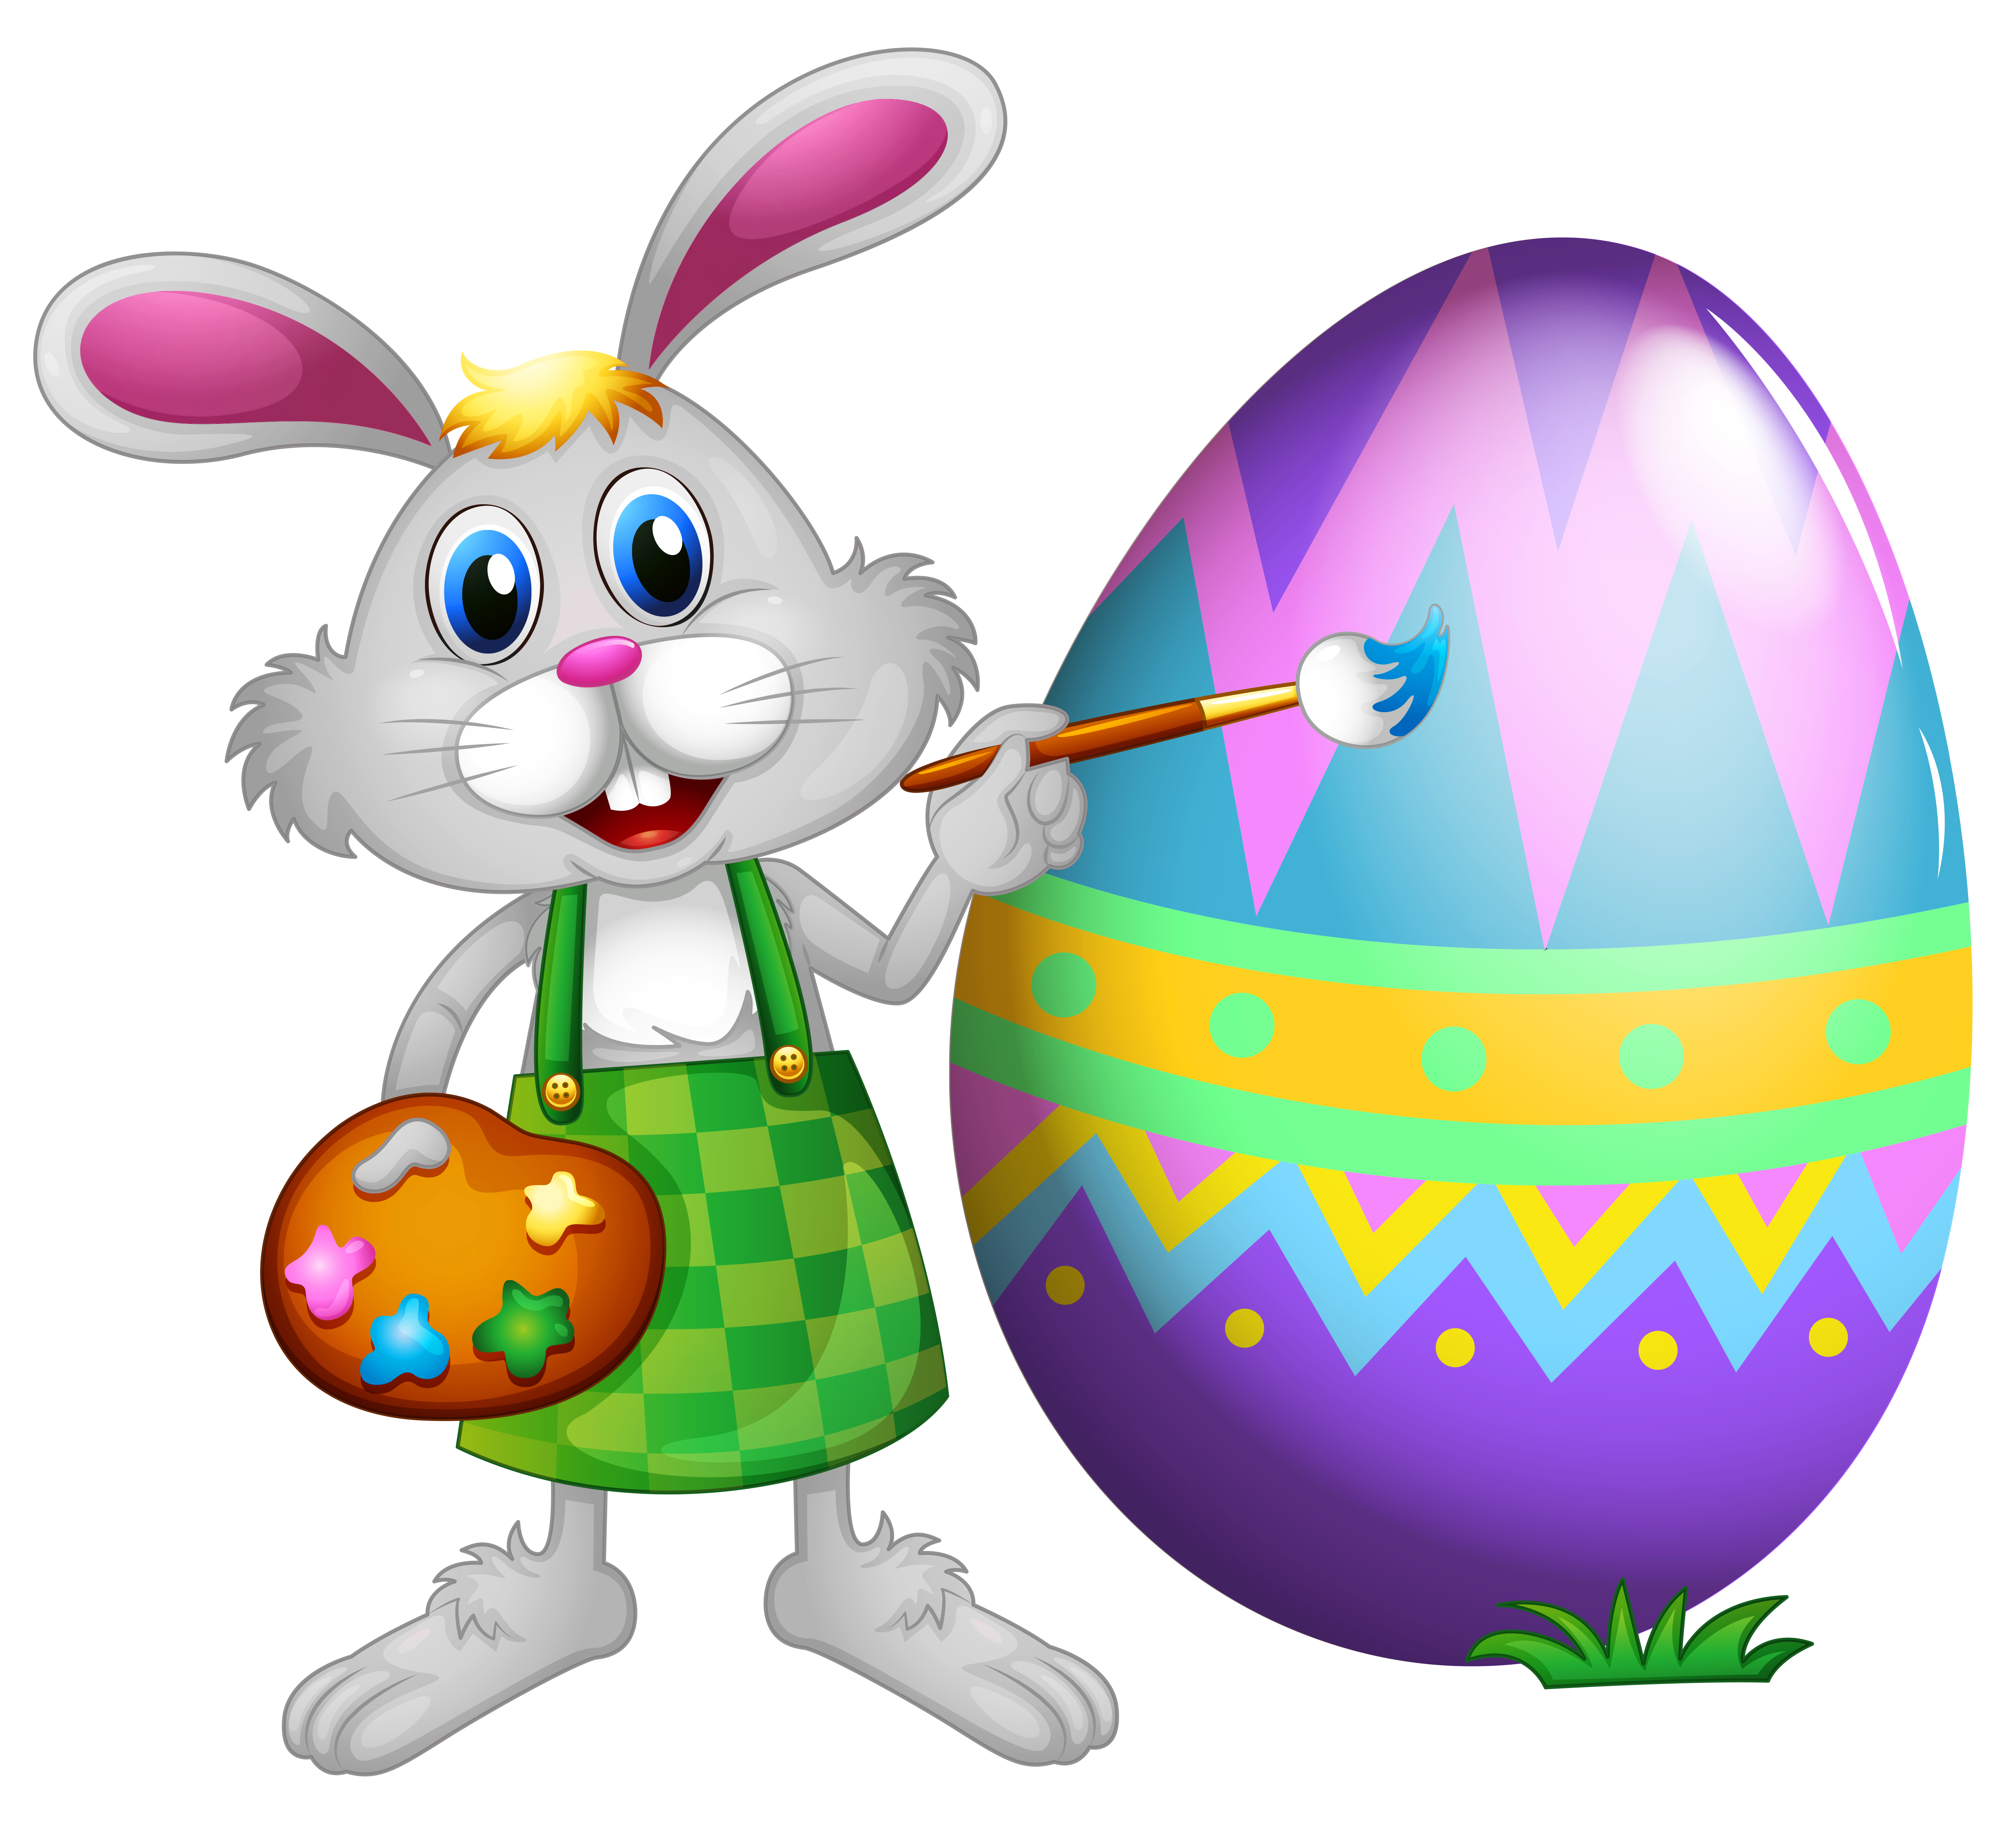 Clip Art Of Easter Bunny .